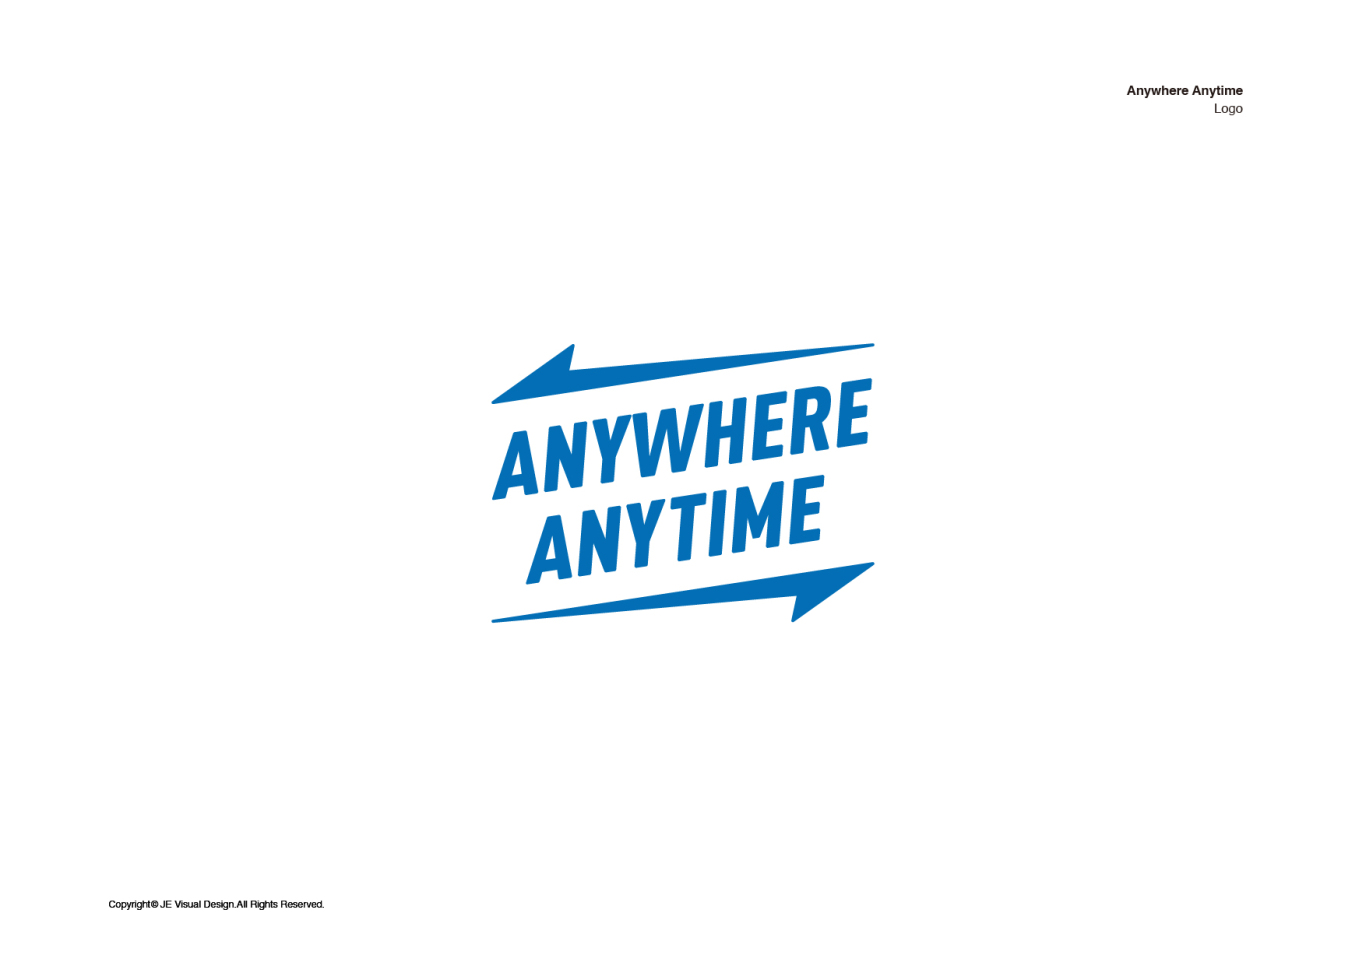 Anywhere Anytime logo设计图16